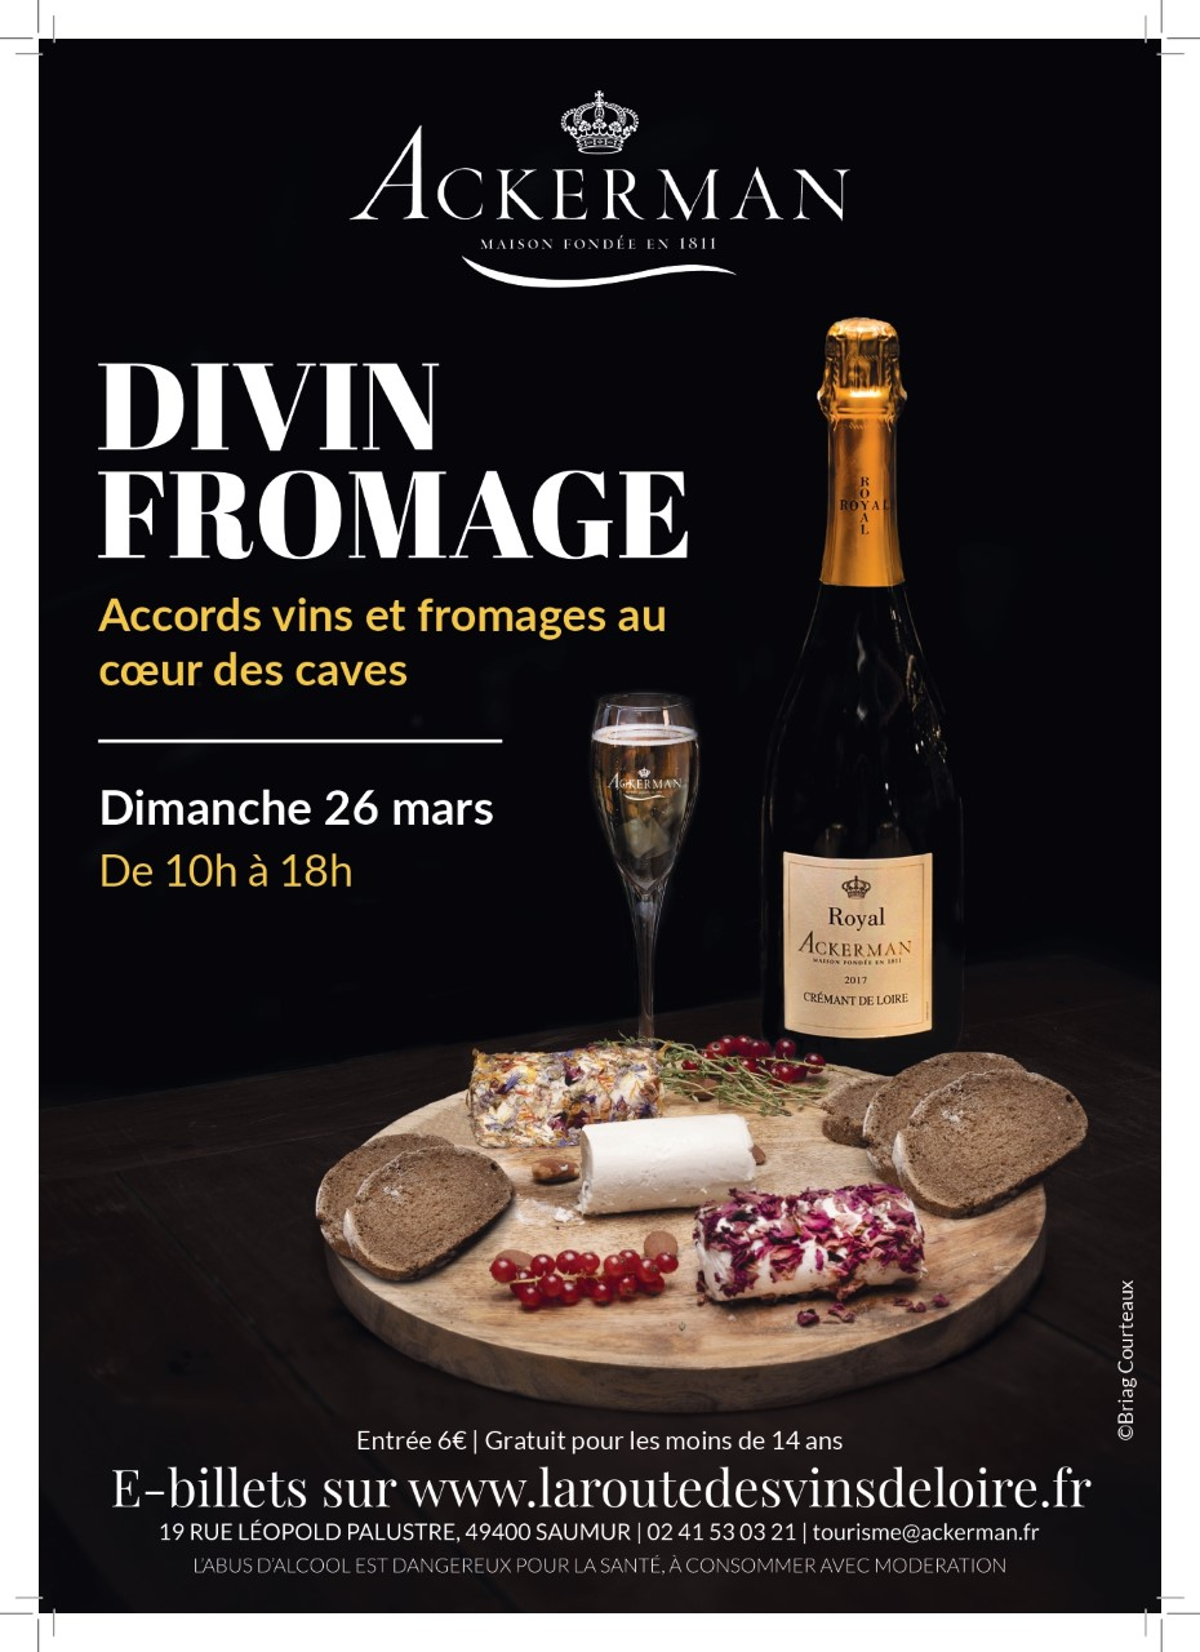 DIVIN FROMAGE©